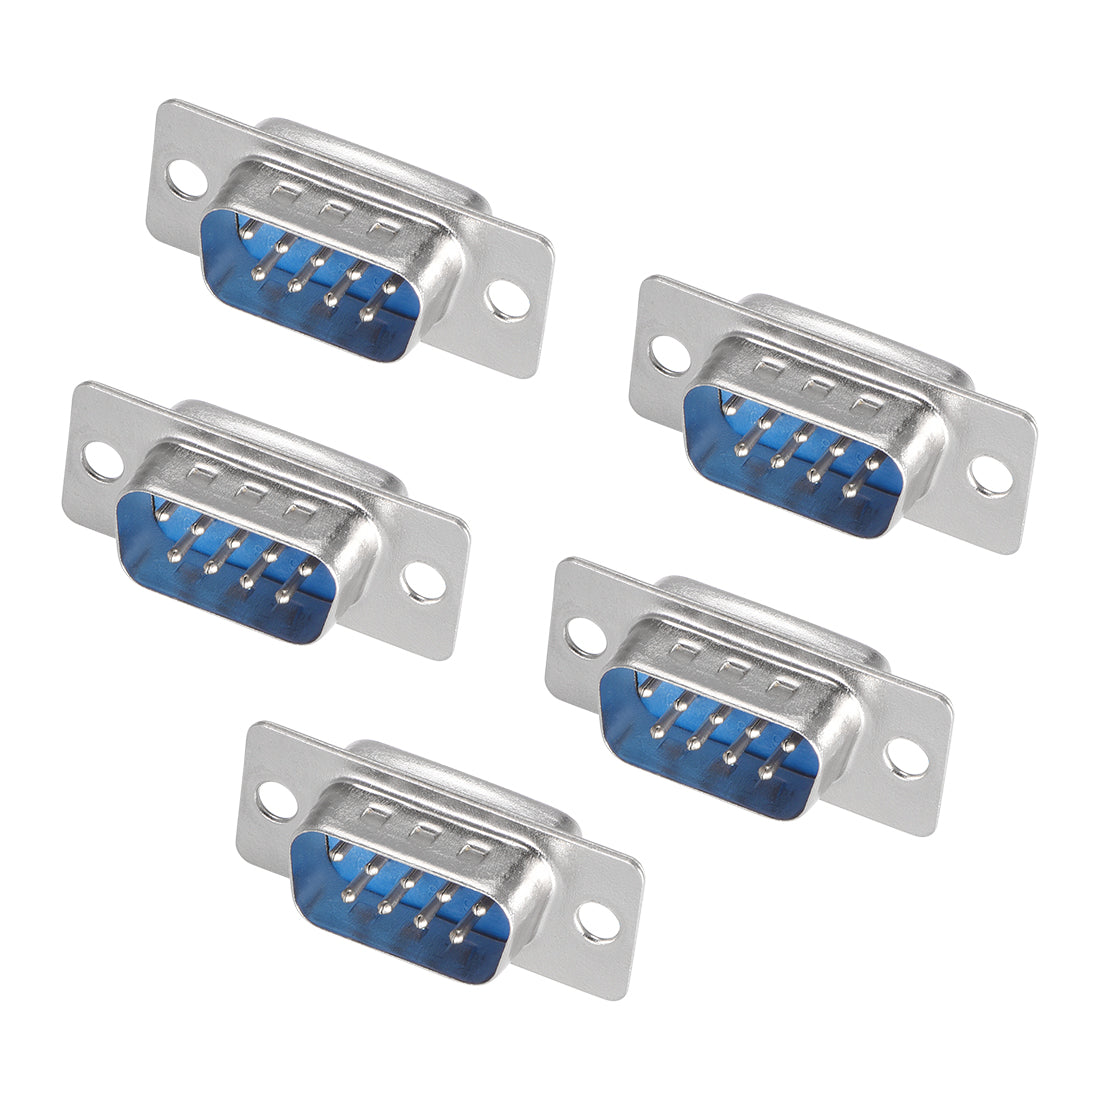 uxcell Uxcell D-sub Connector Male Plug 9-pin 2-row Port Terminal Breakout Solder Type for Mechanical Equipment CNC Computers Blue 5pcs